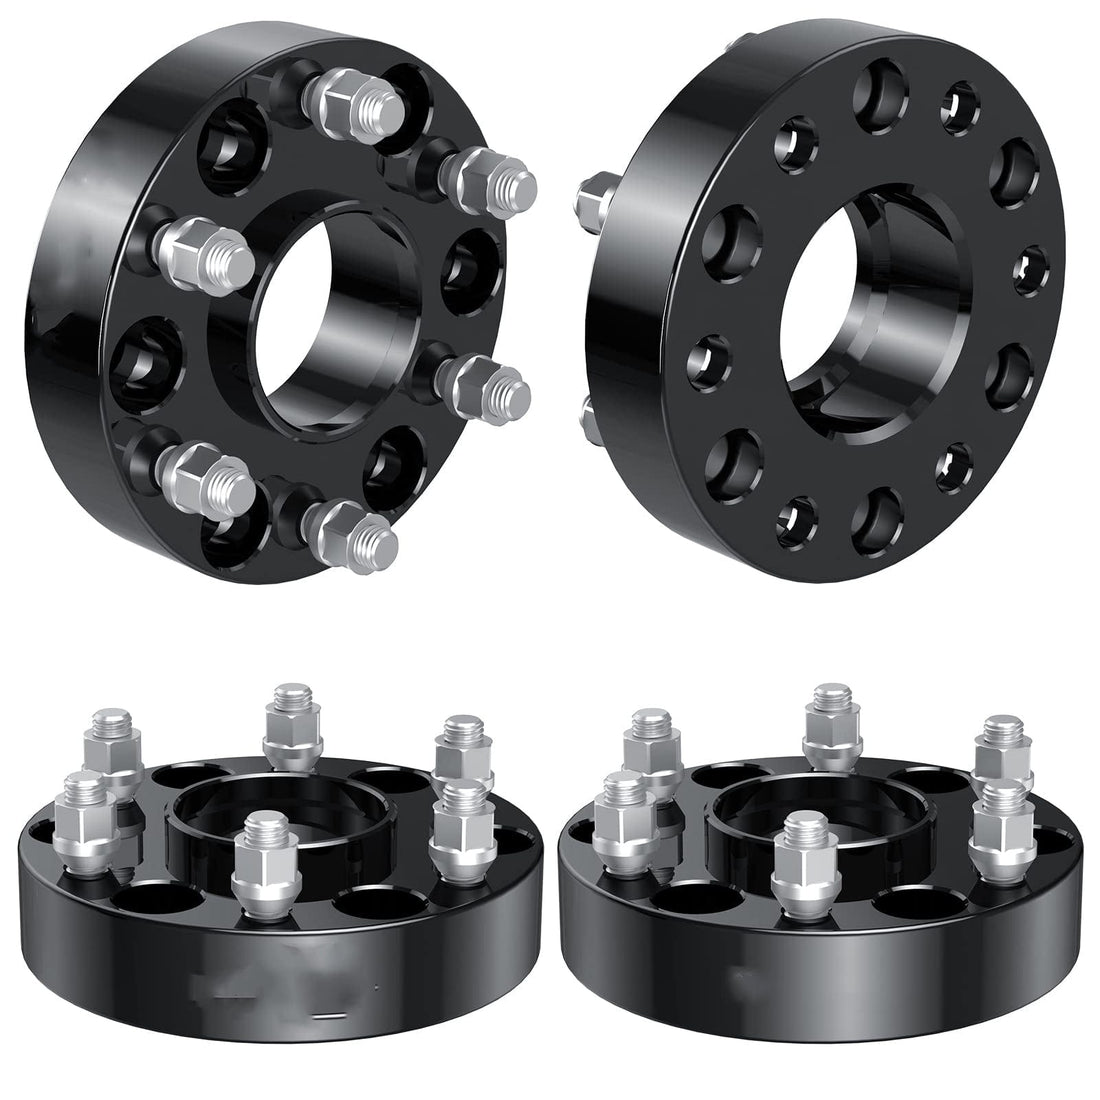 2 Inch 5x5" Hubcentric Spacers,1/2-20 Studs, for Jeep 99-17